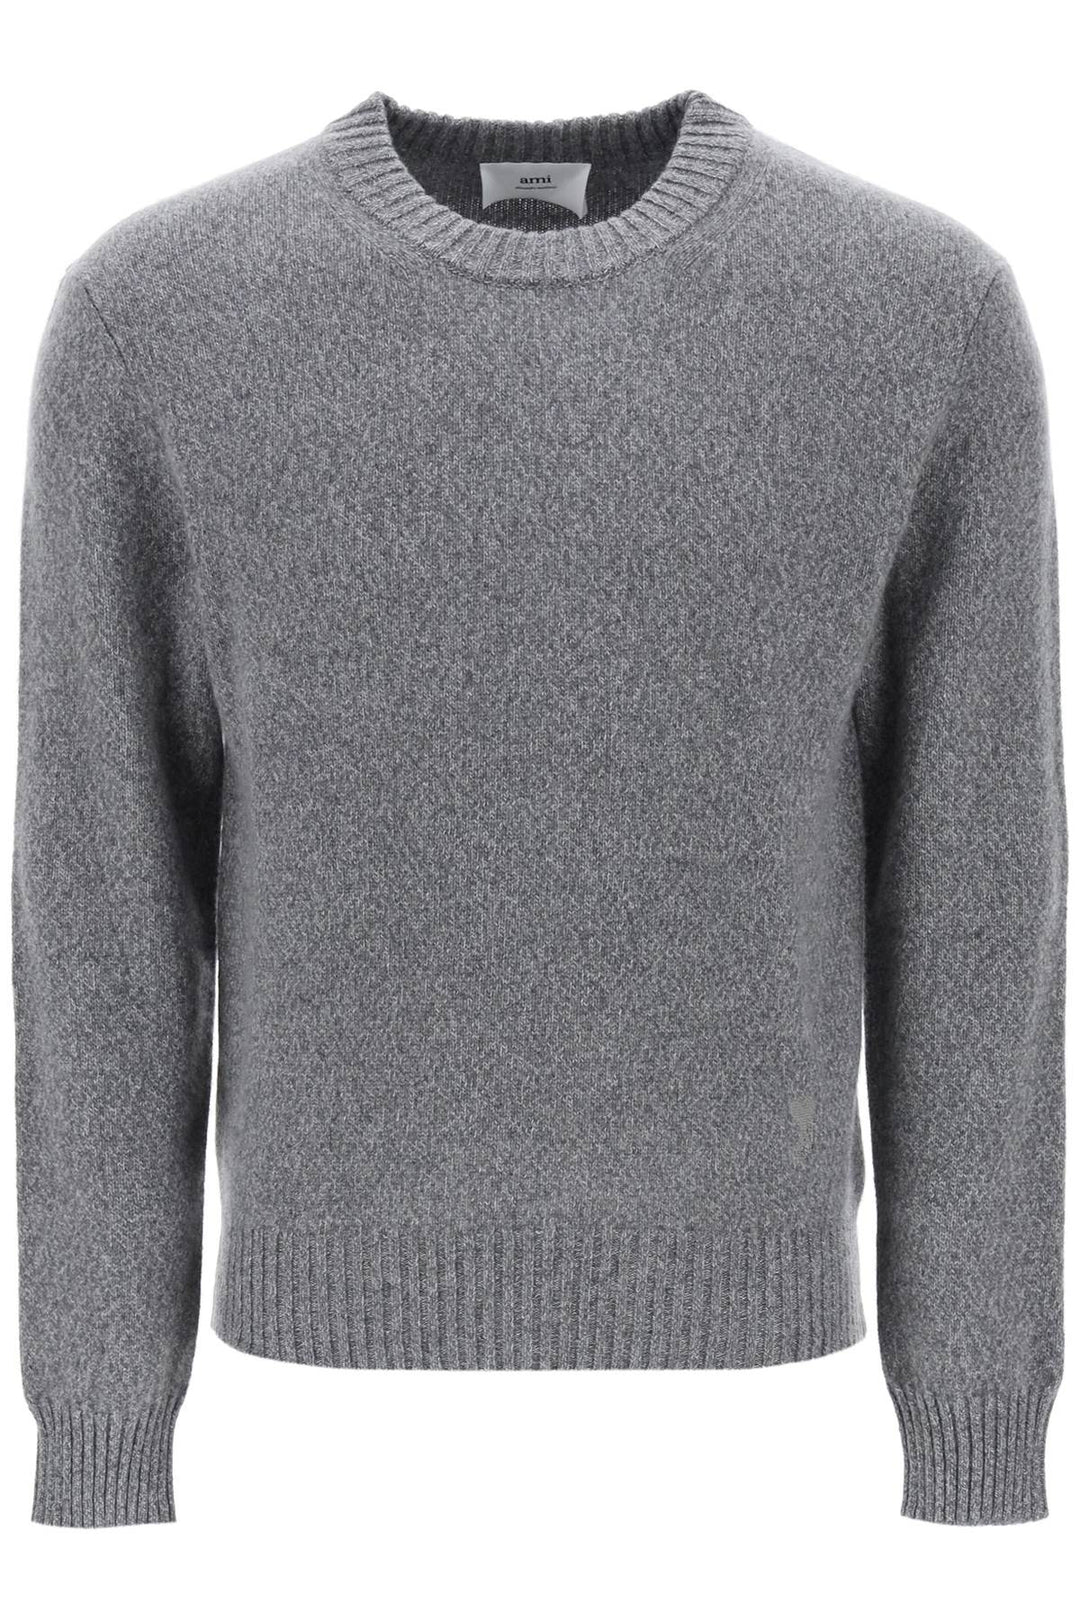 Ami paris cashmere and wool sweater-0